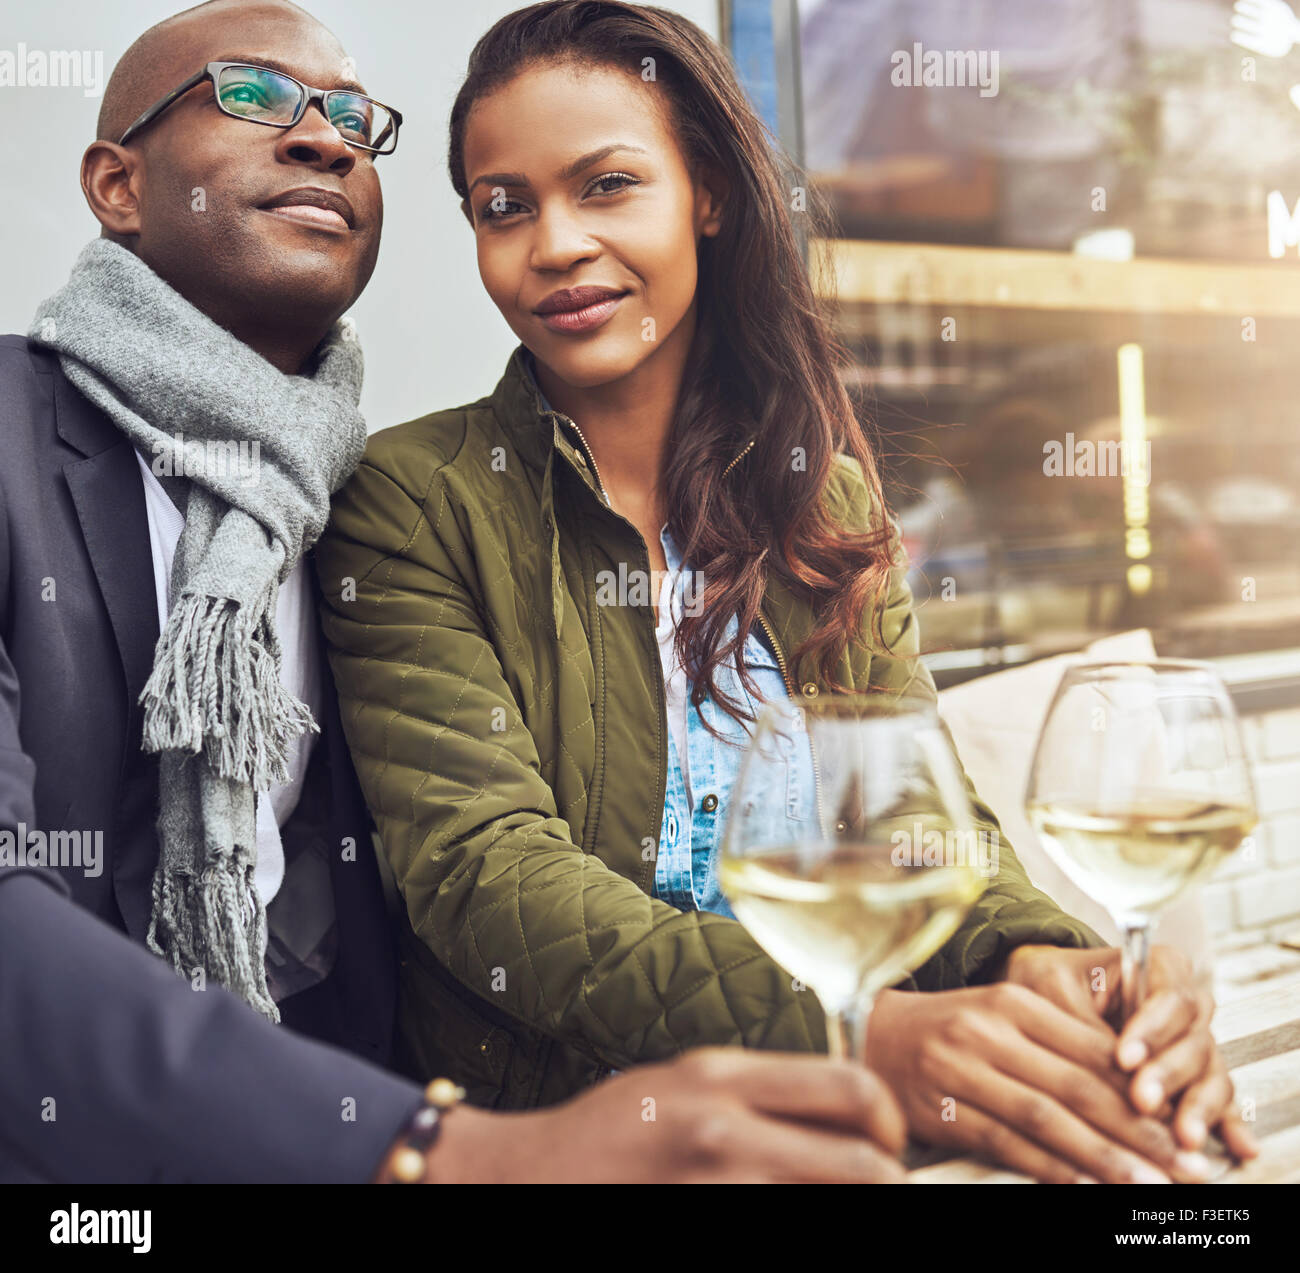 Afro american couple dating, woman looking straight at camera Stock Photo